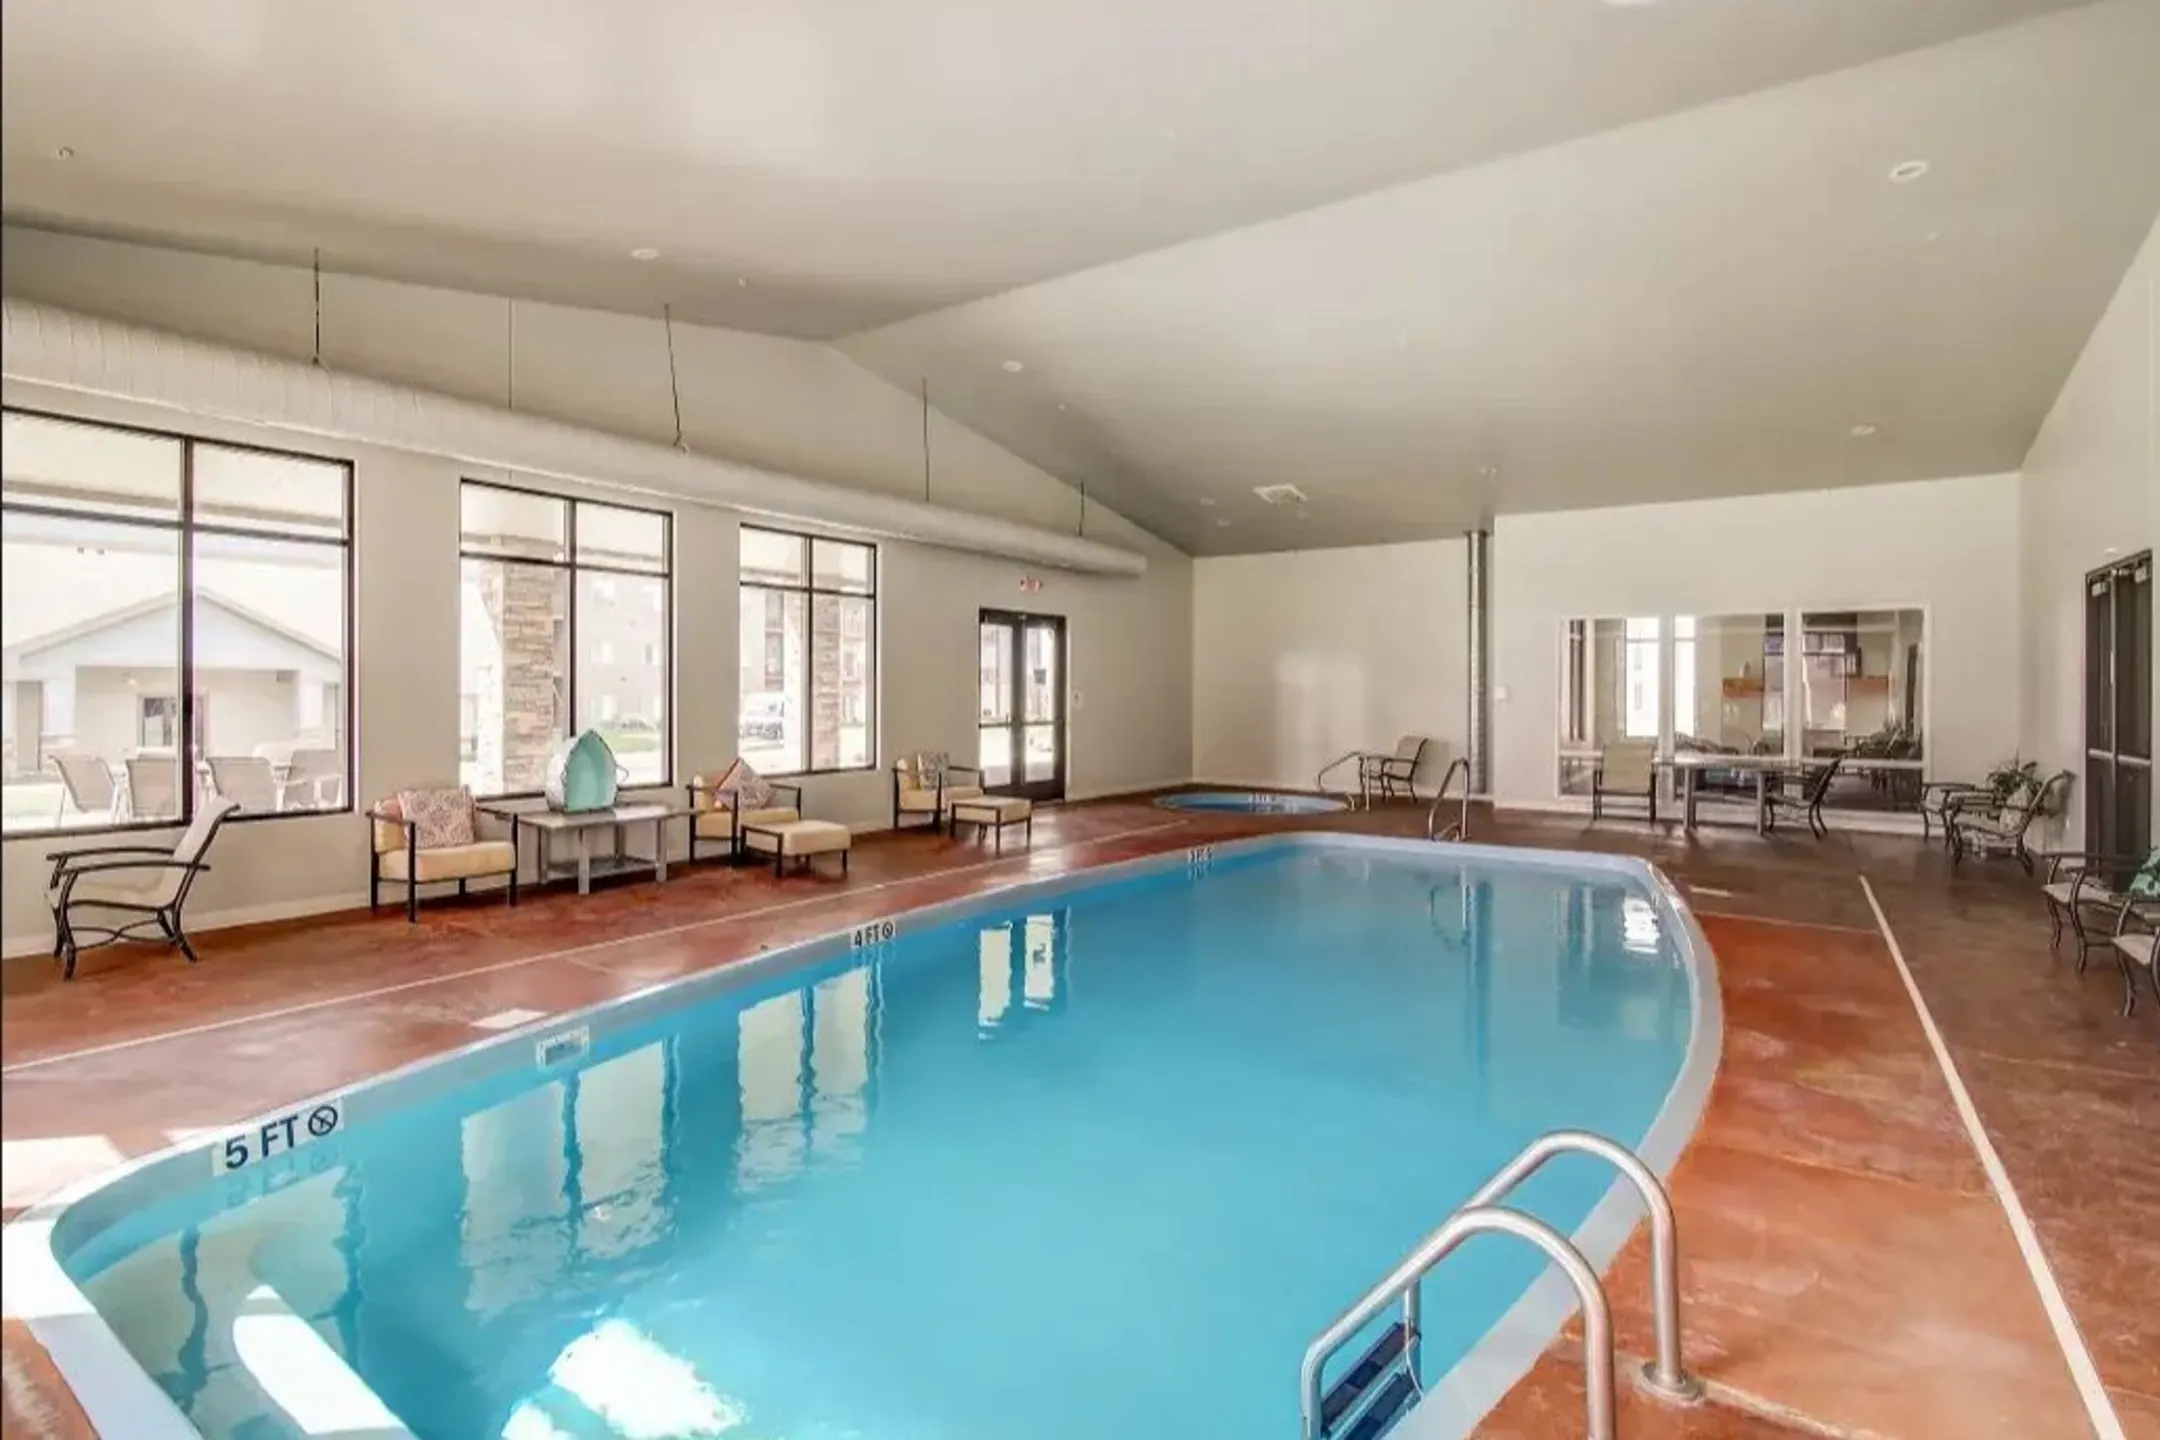 Pool - North Highlands Luxury Apartments - Minot, ND